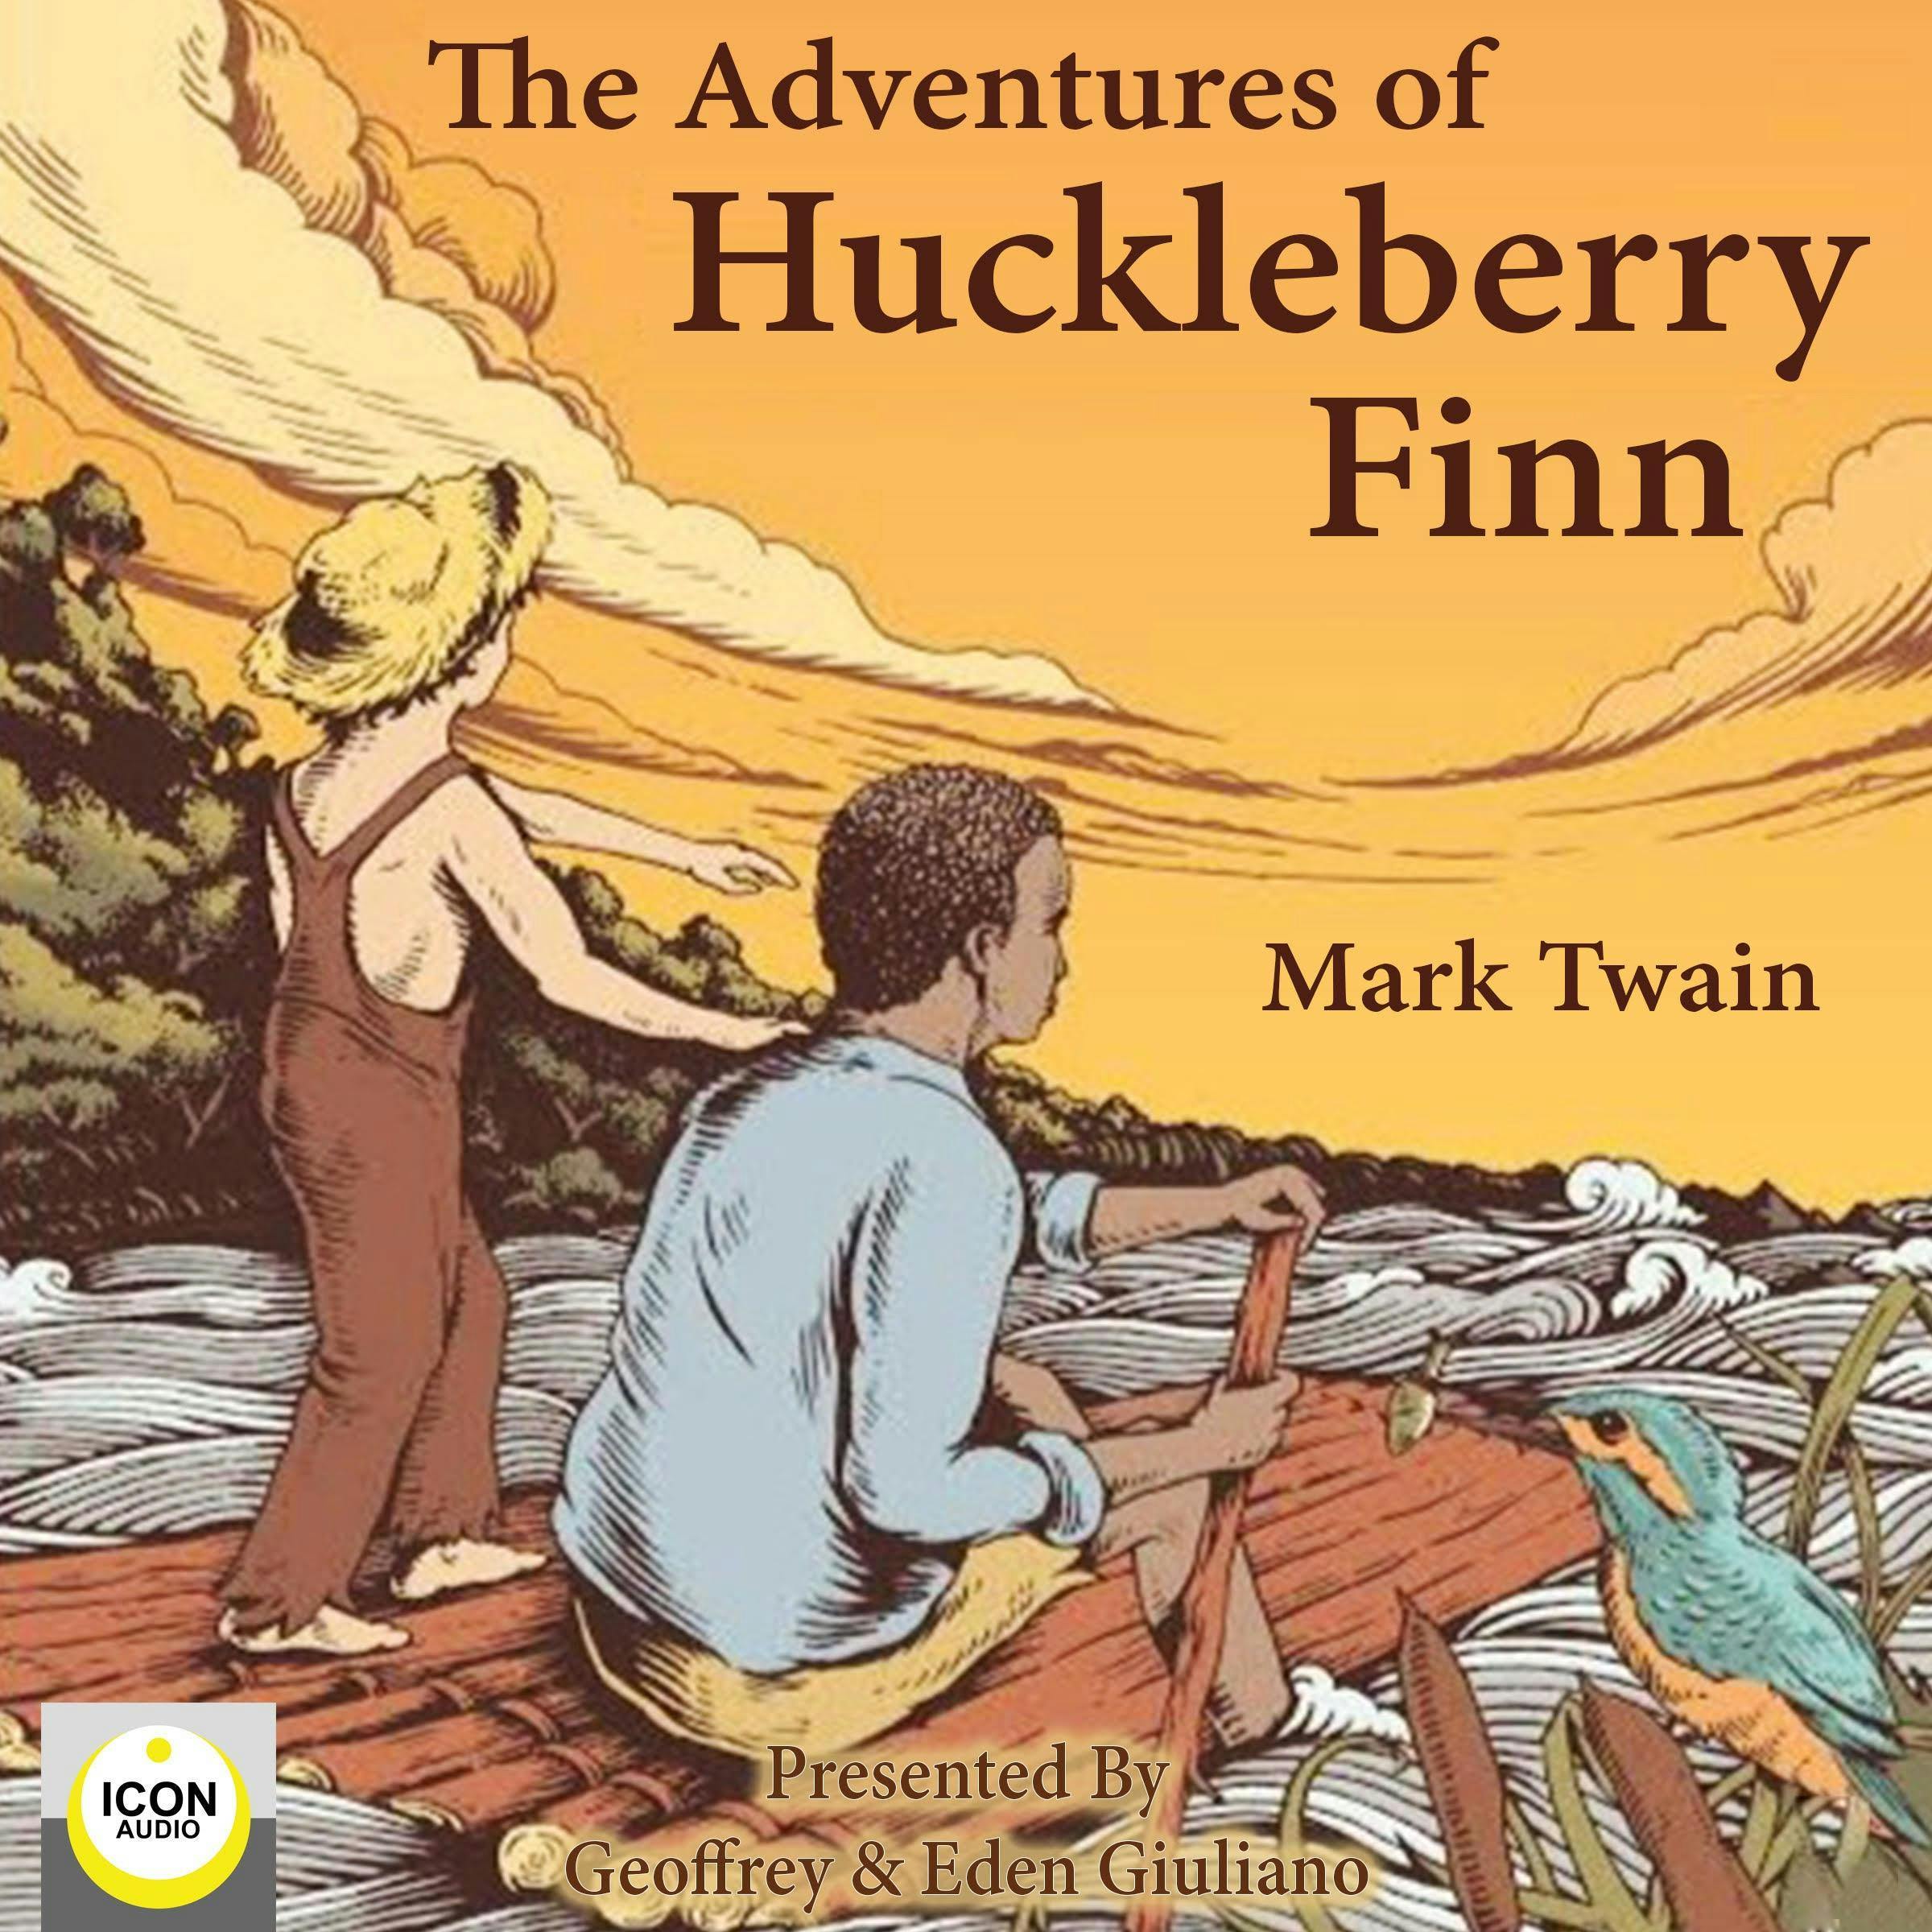 The Adventures of Huckleberry Finn - undefined